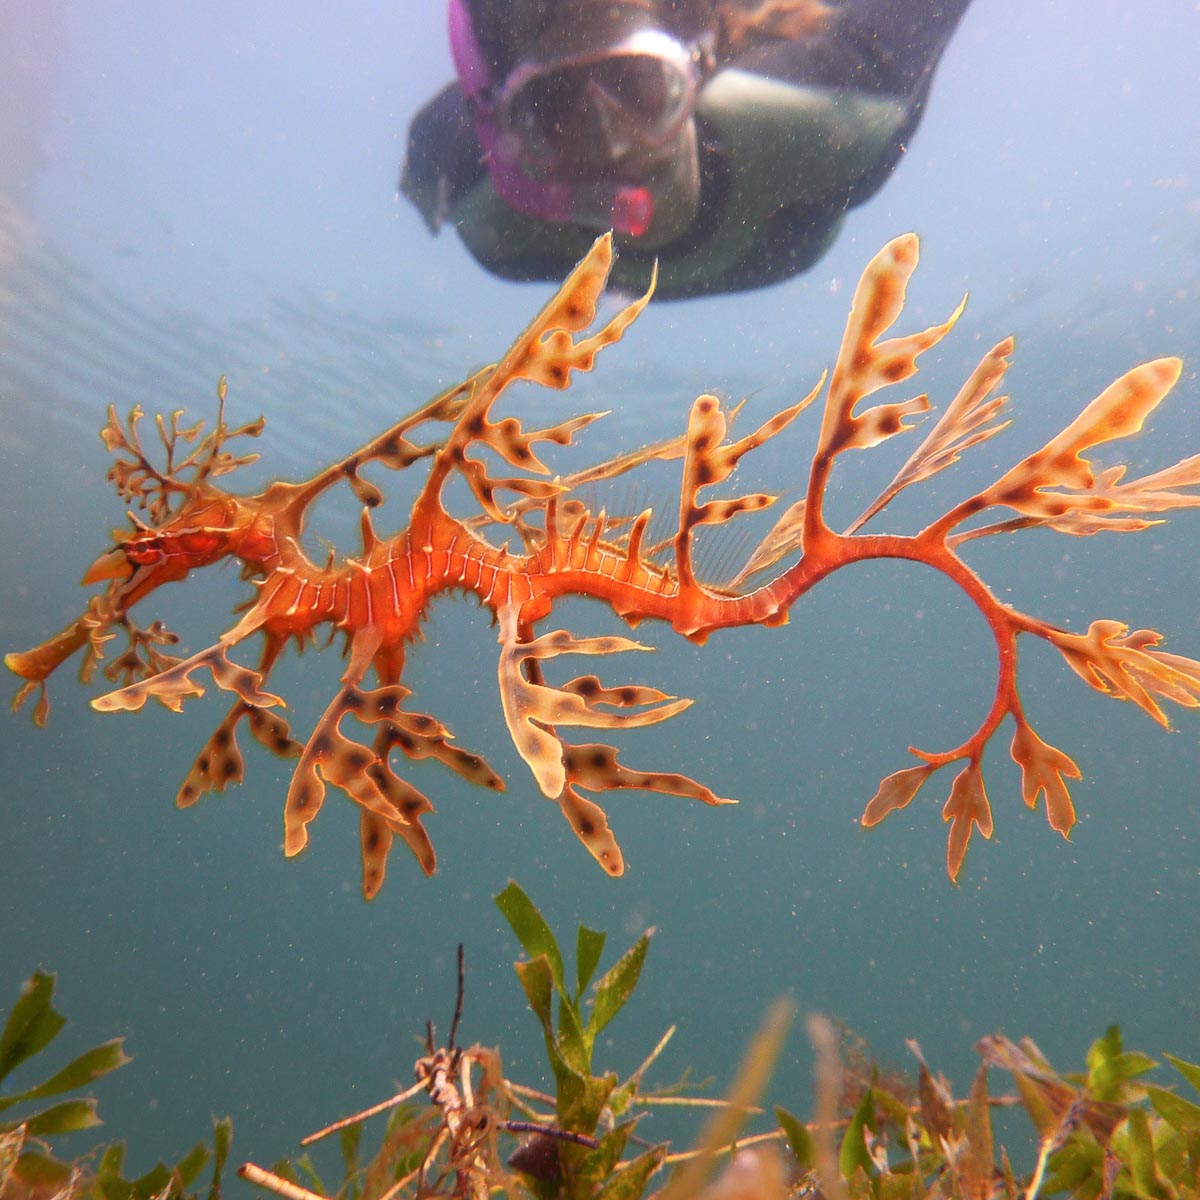 Snorkel with Seadragons to Celebrate Festival of Nature - 17th December